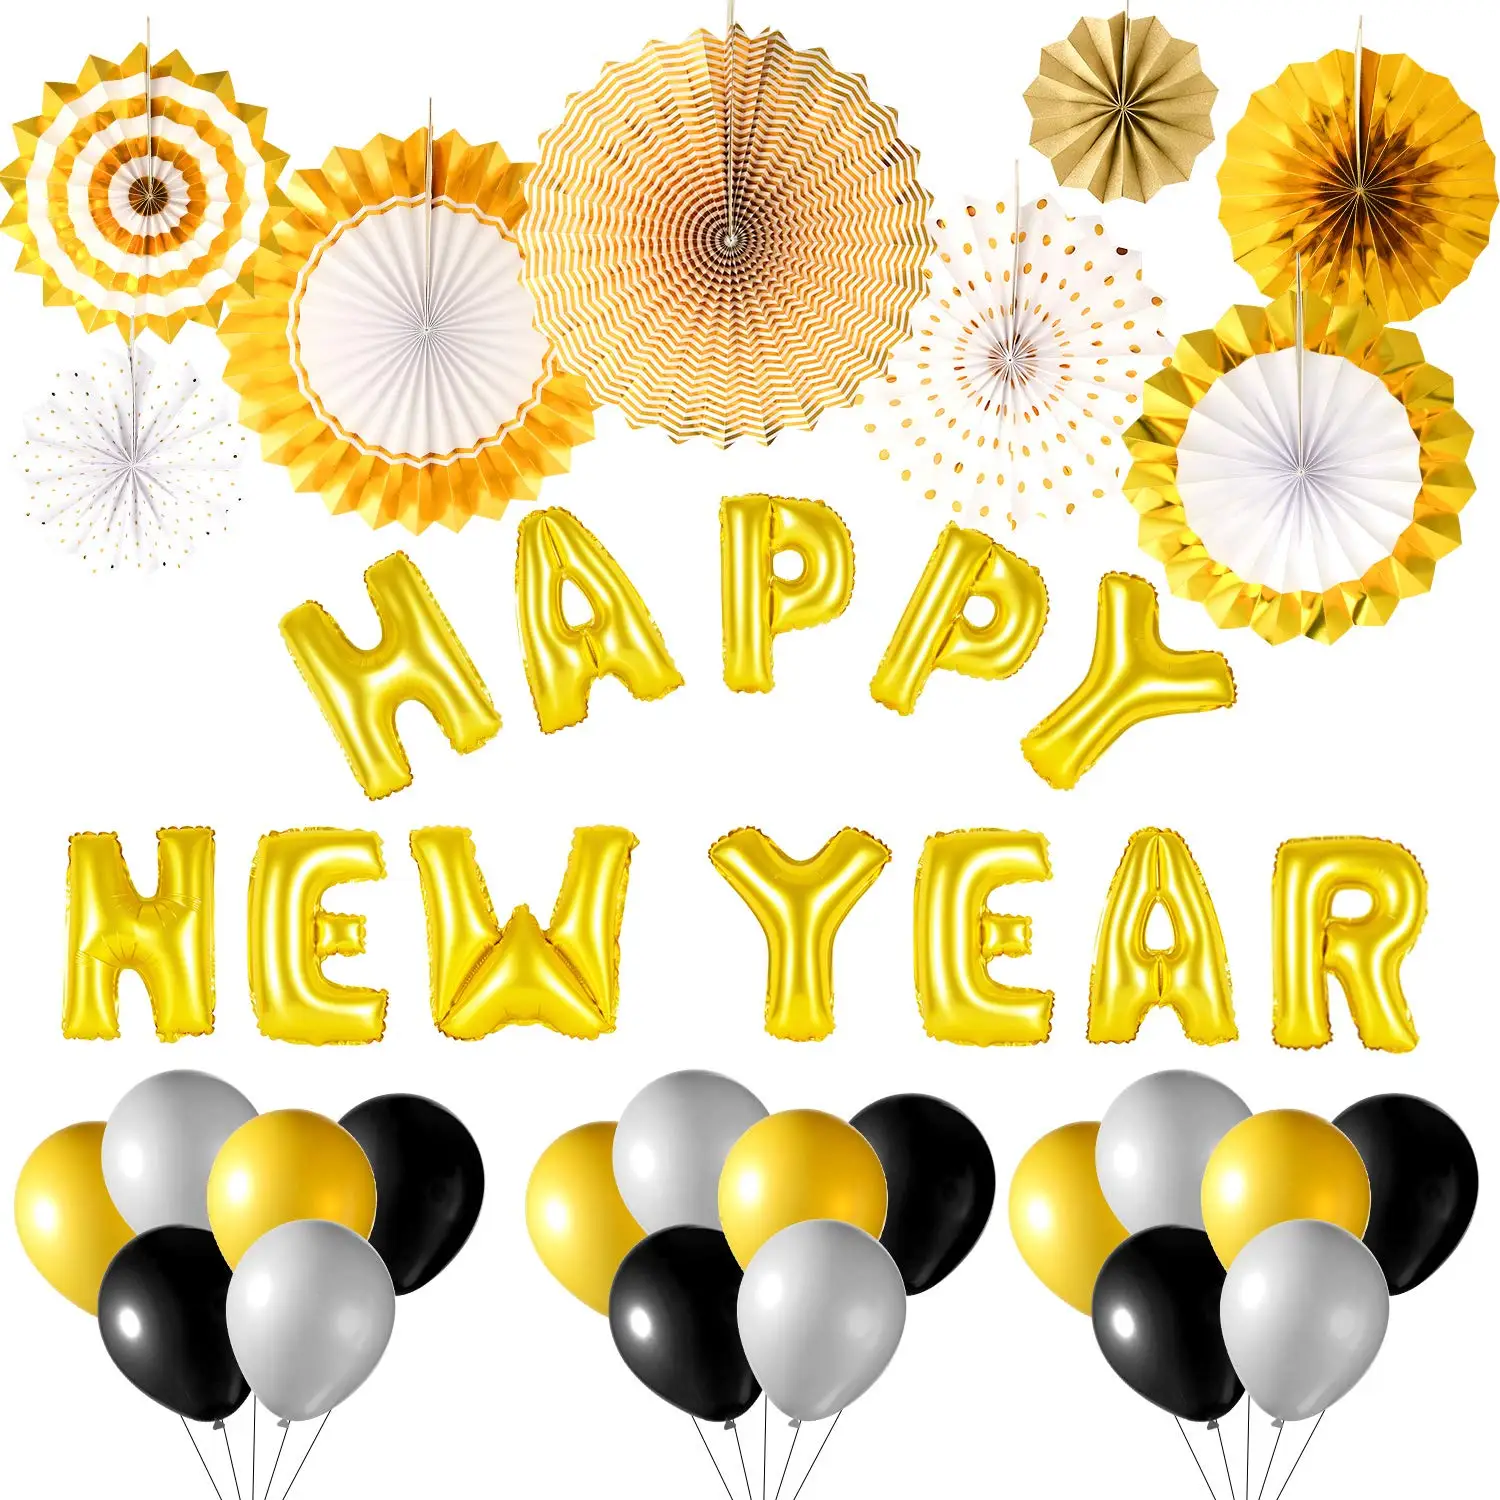 New Years Eve Party Supplies 2021,Happy New Year Party Decorations Kit include Happy New Year Banner,2021 Gold Number Foil Balloons,Cupcake Toppers and Wrappers,Chocolate Stickers and Ballons Kits for New Years Eve Party